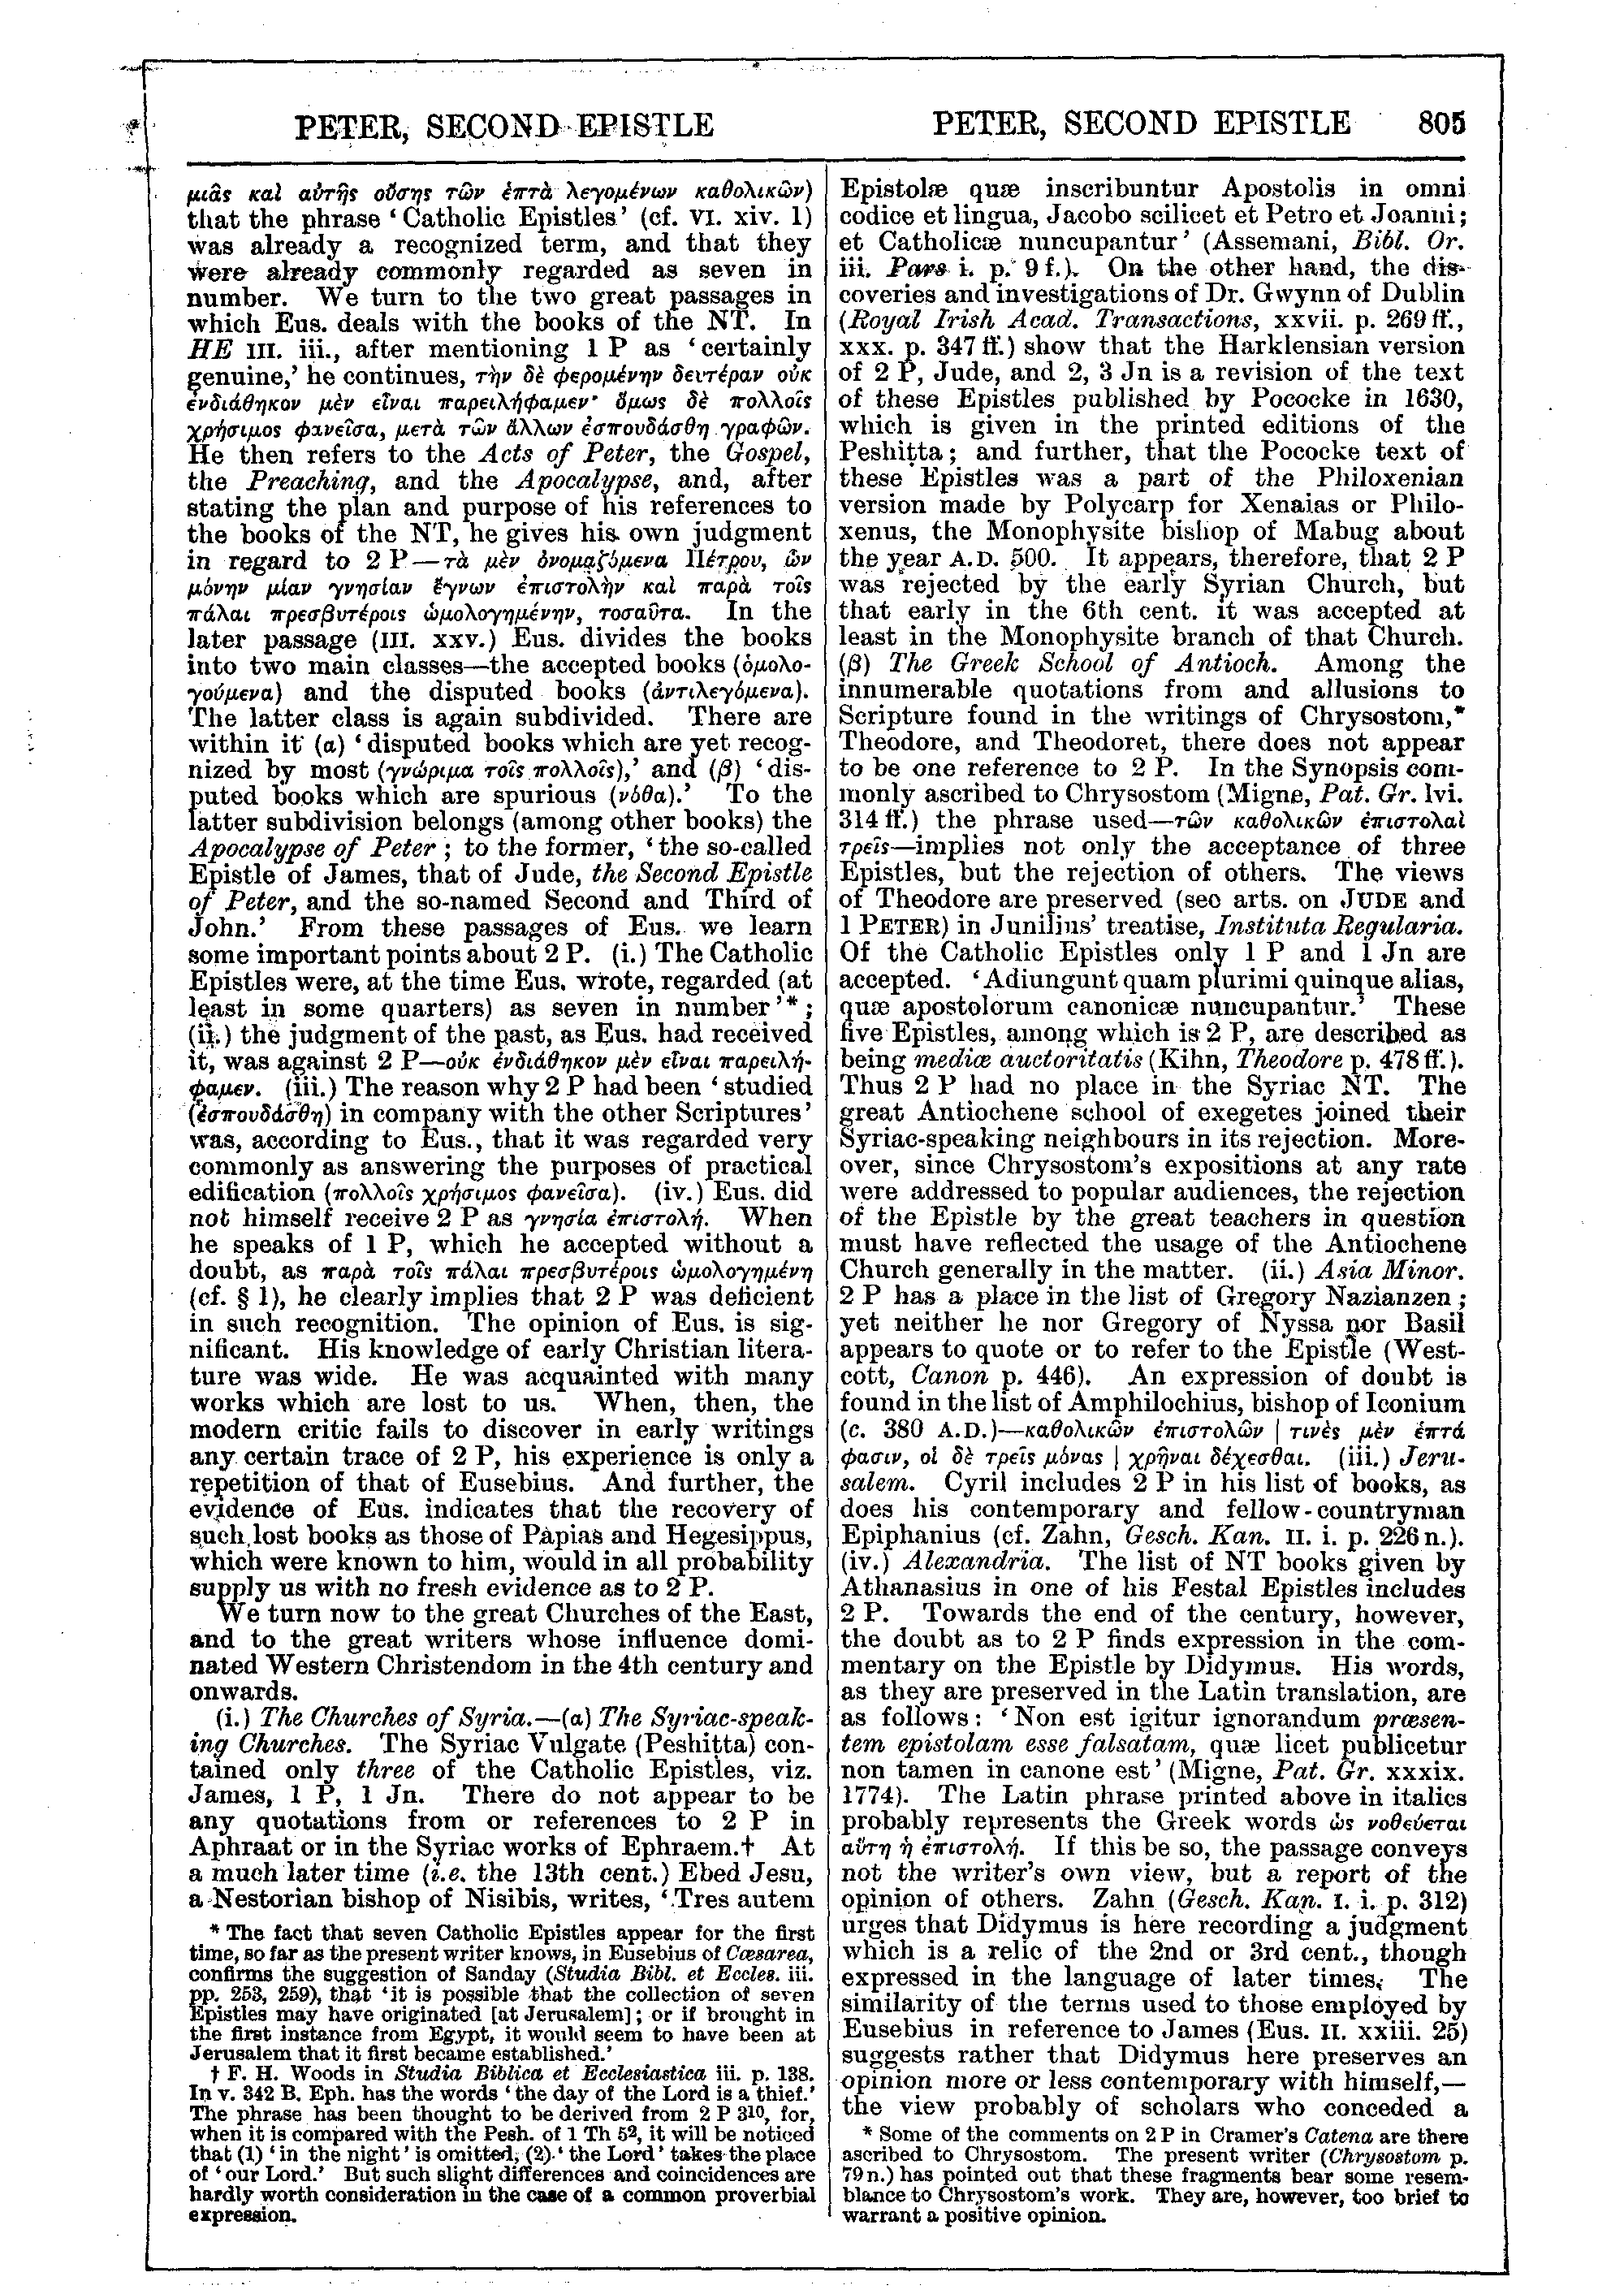 Image of page 805